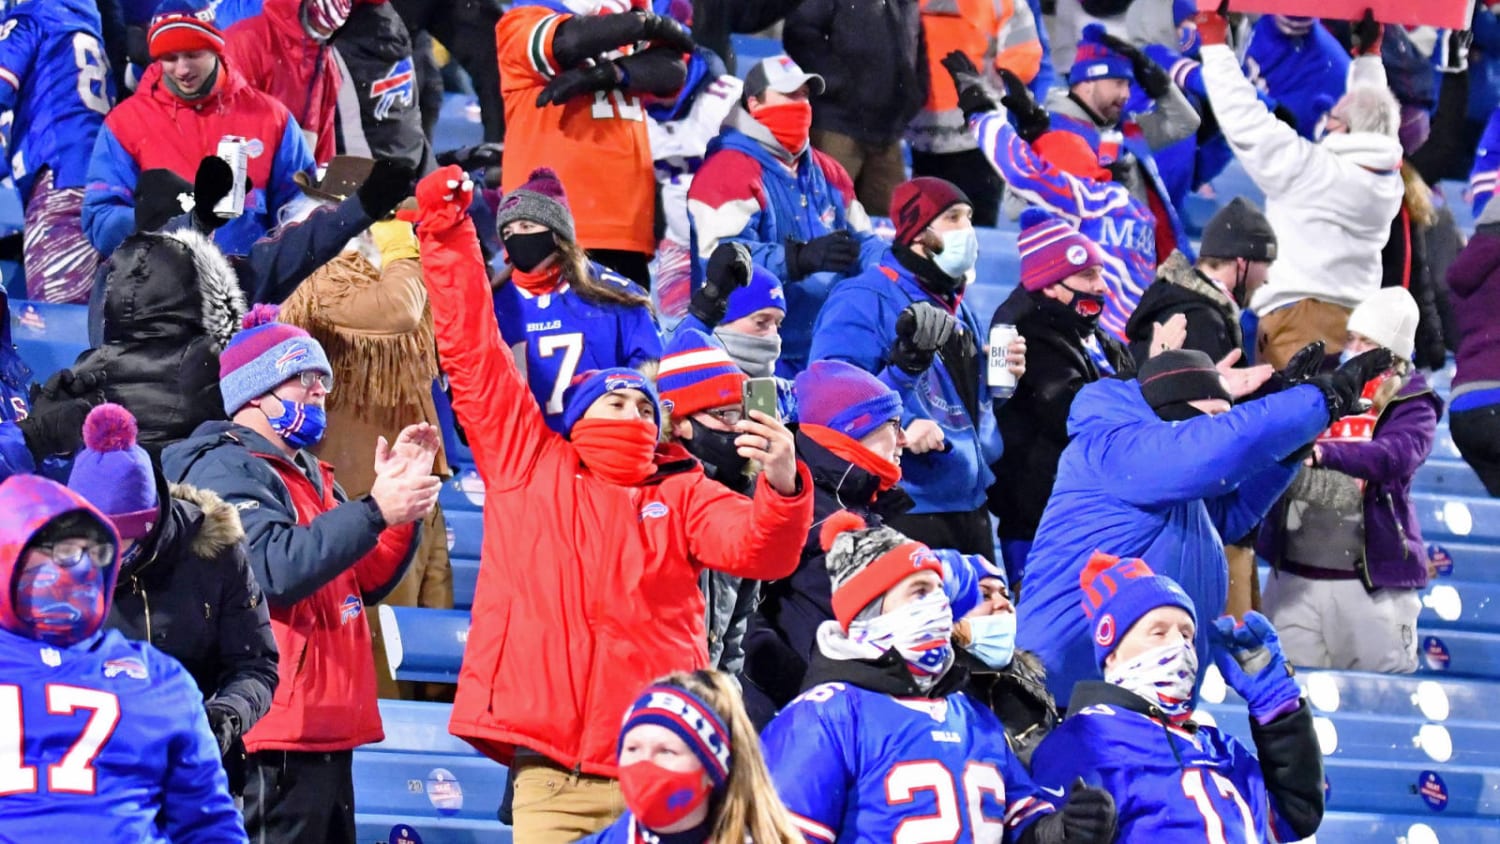 Bills plan to have only vaccinated fans at home games in 2021